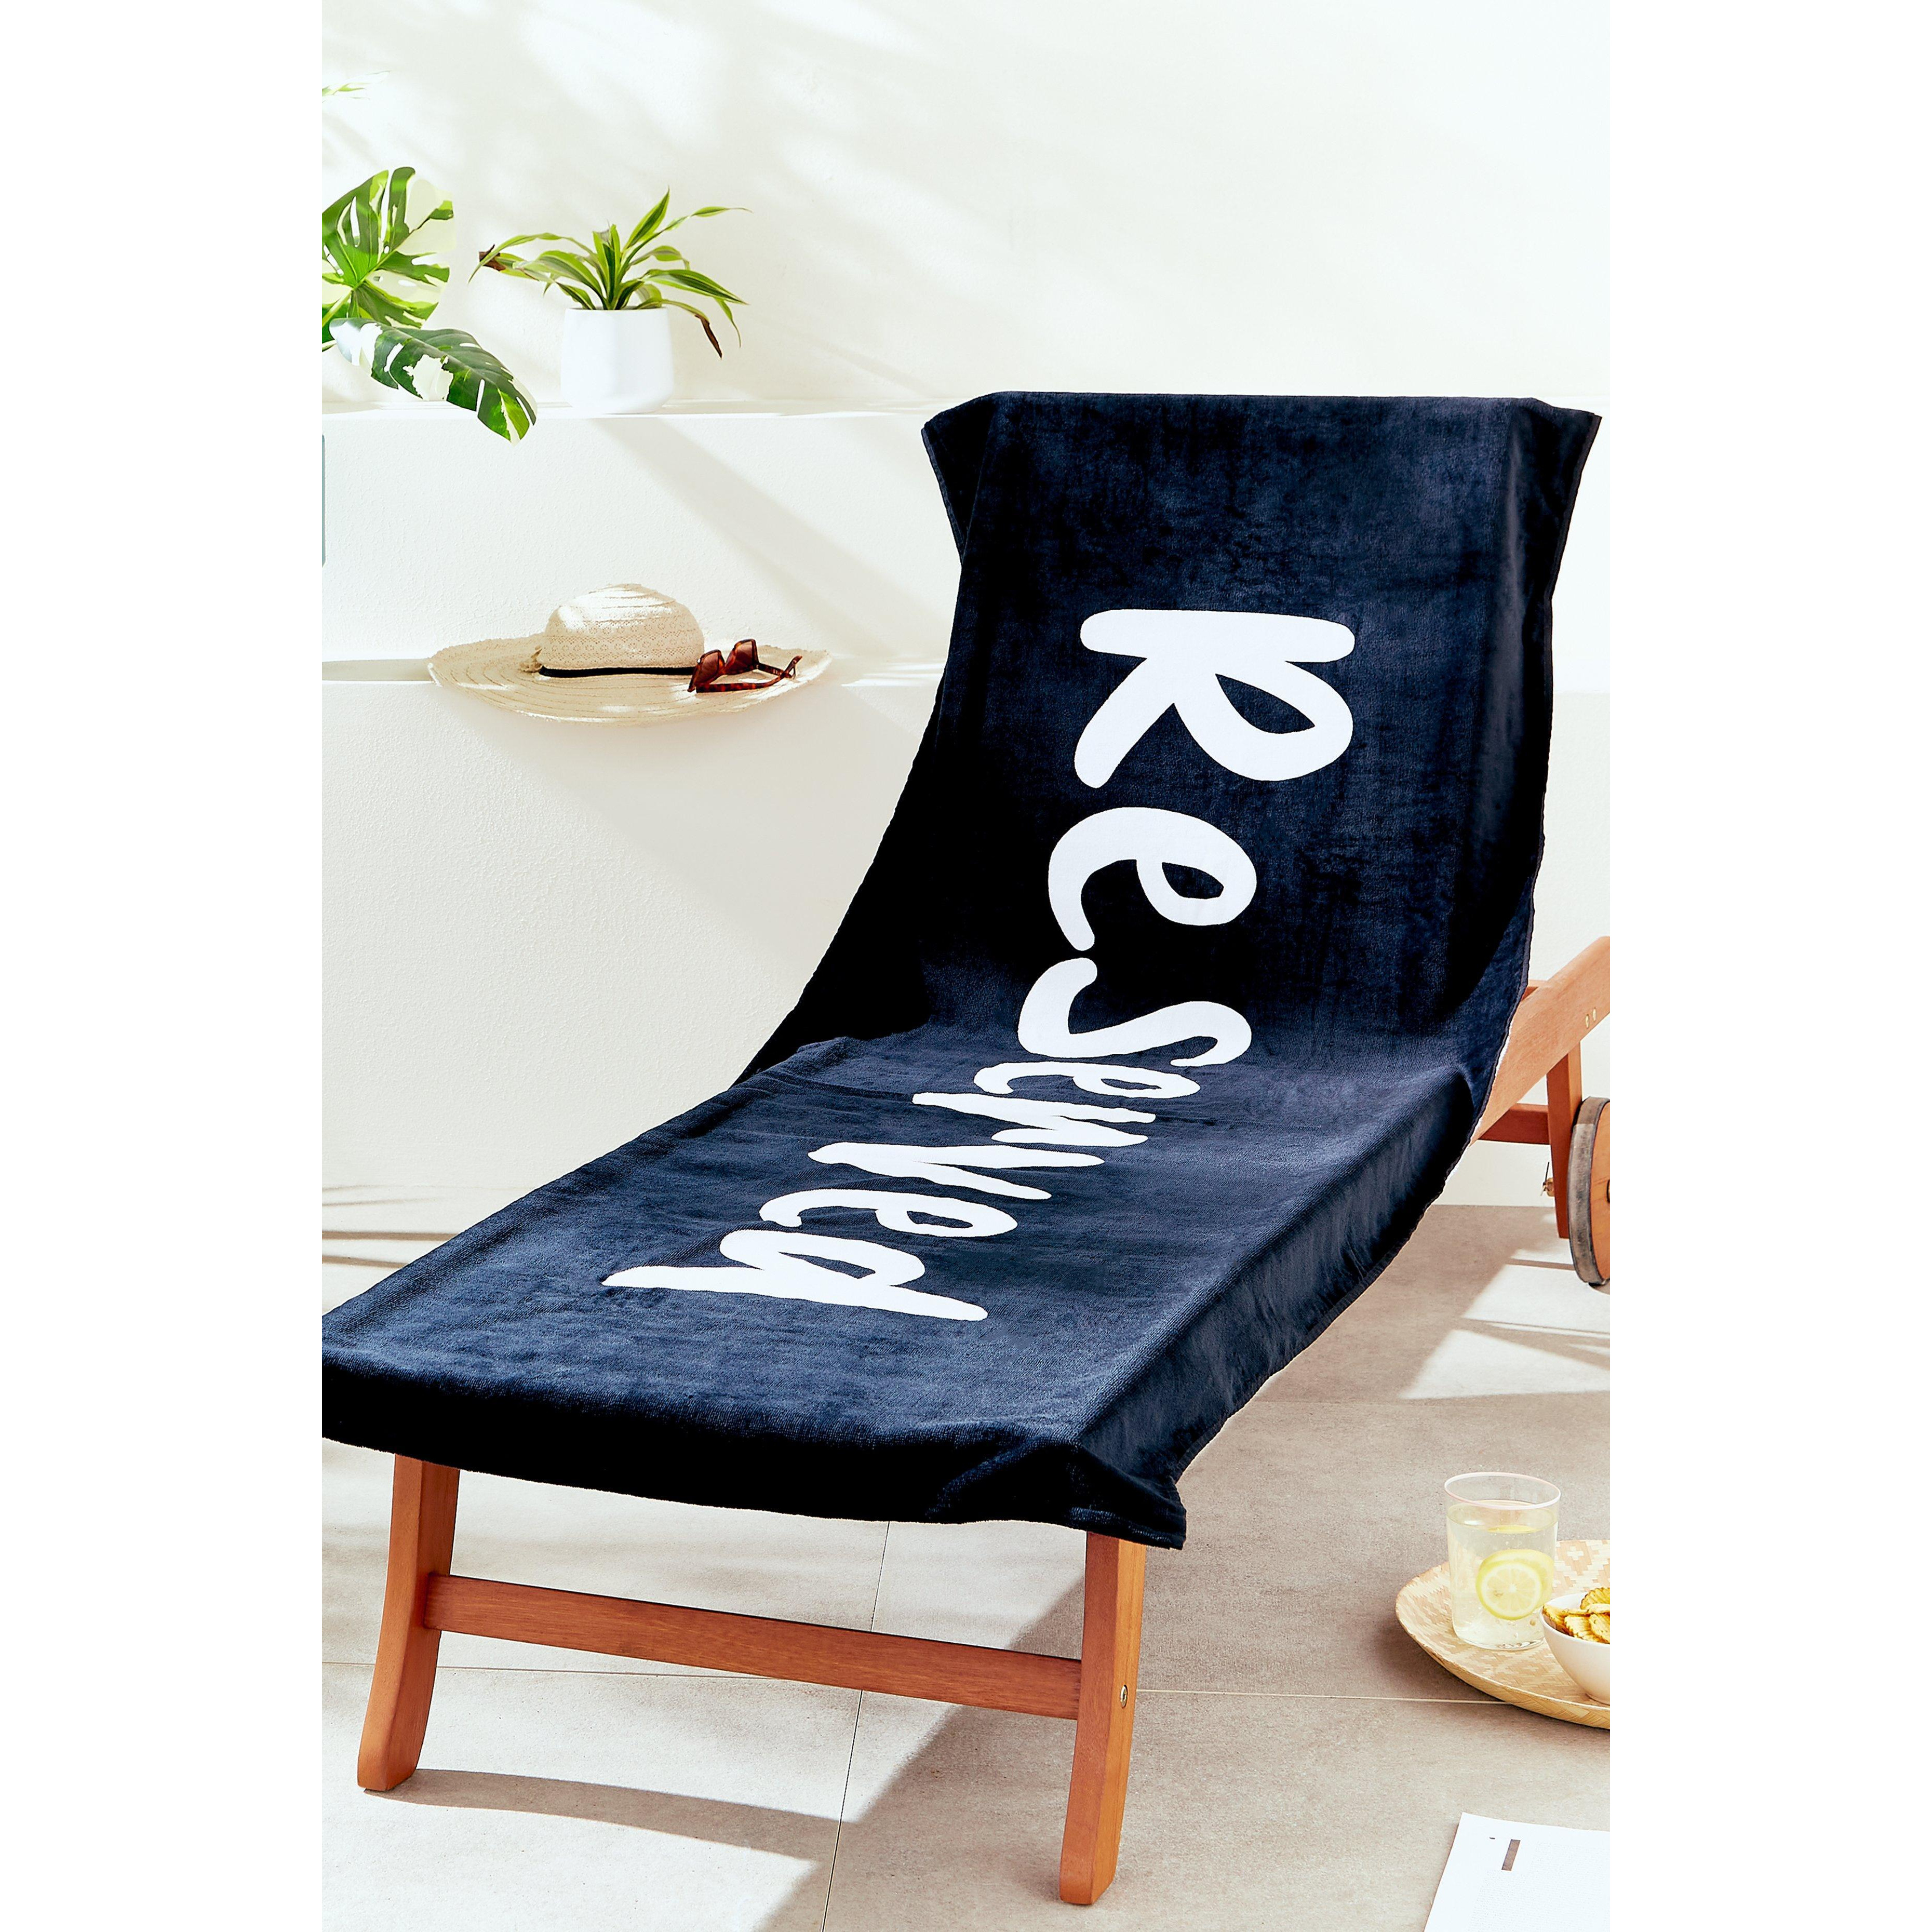 'Reserved' Beach Sun Lounger Towel - image 1